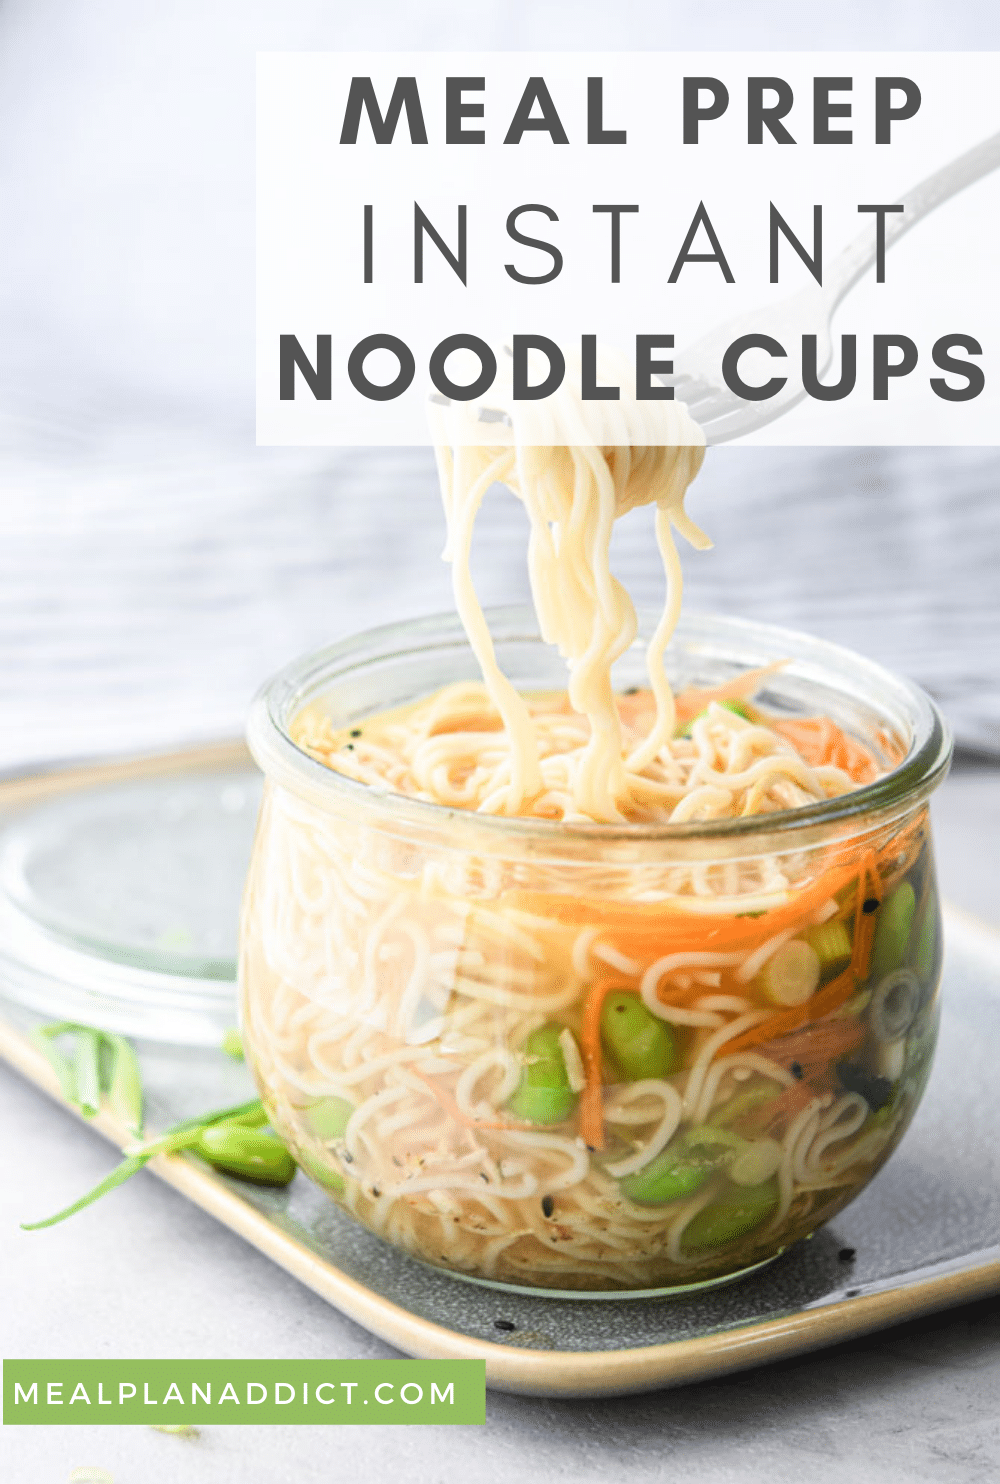 Noodle cup pin for Pinterest